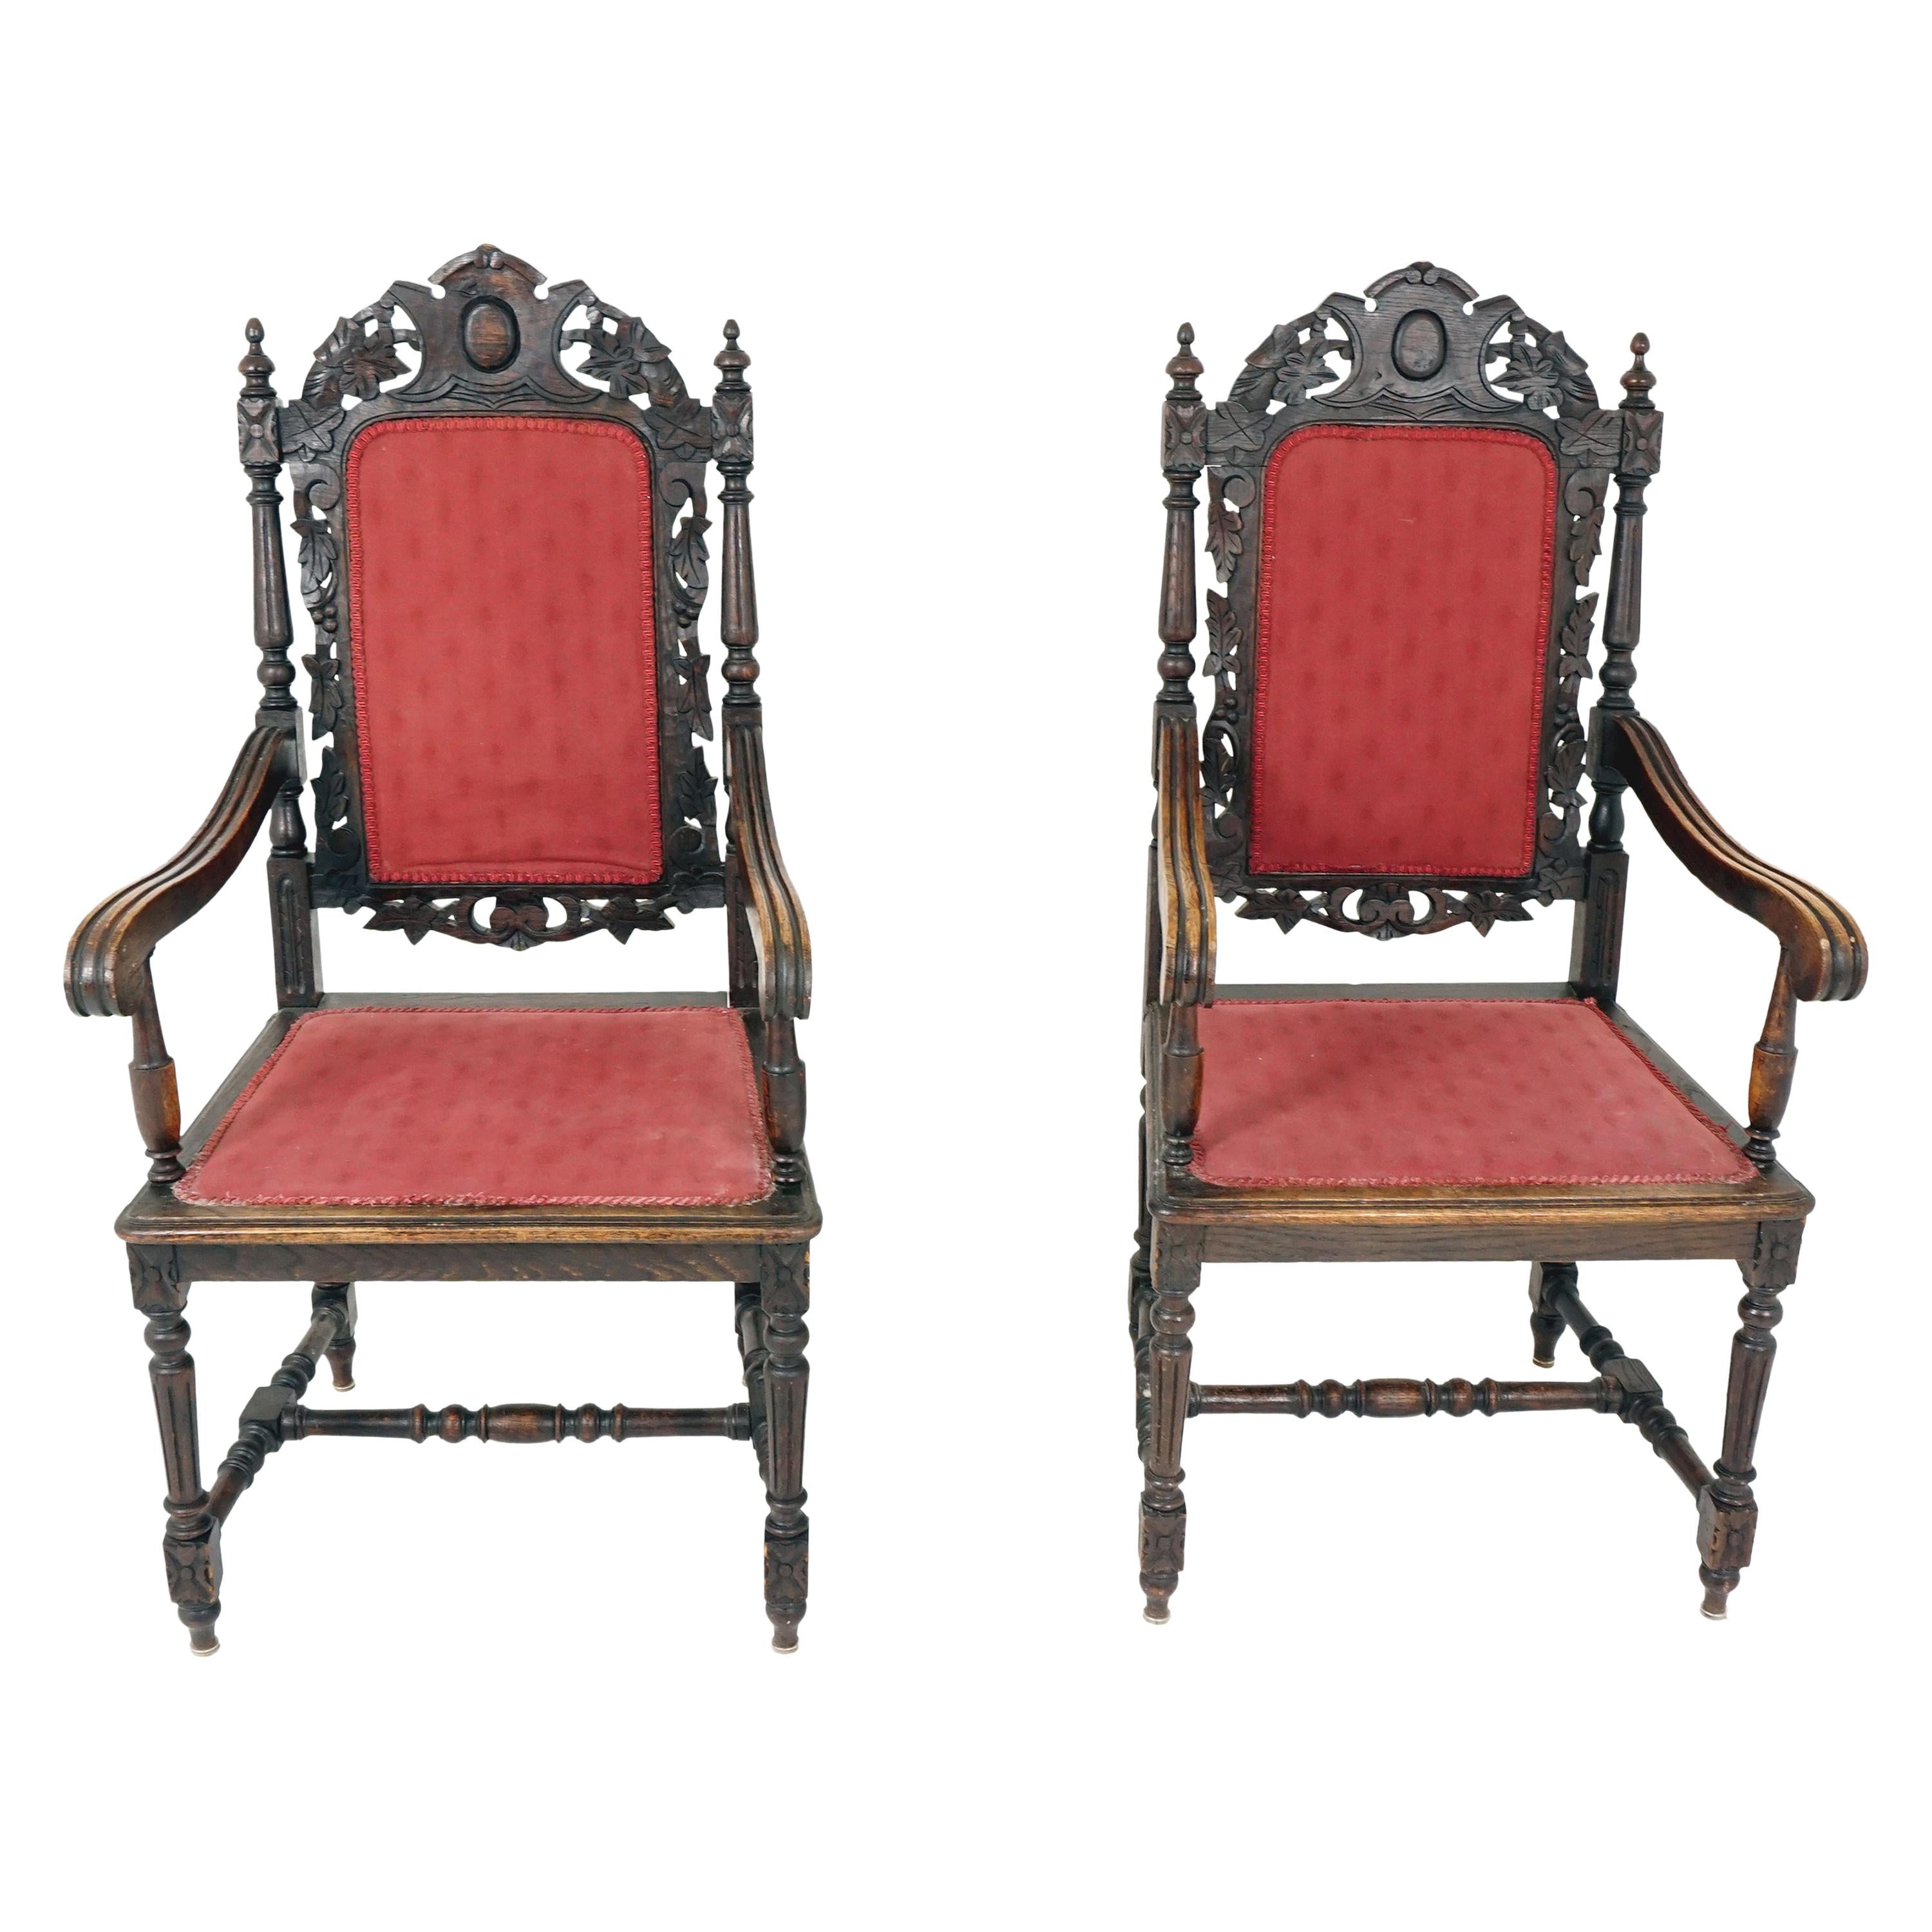 Antique Pair of Arm Chairs, Hand Carved Oak, Throne Chairs, Scotland 1880, B2415